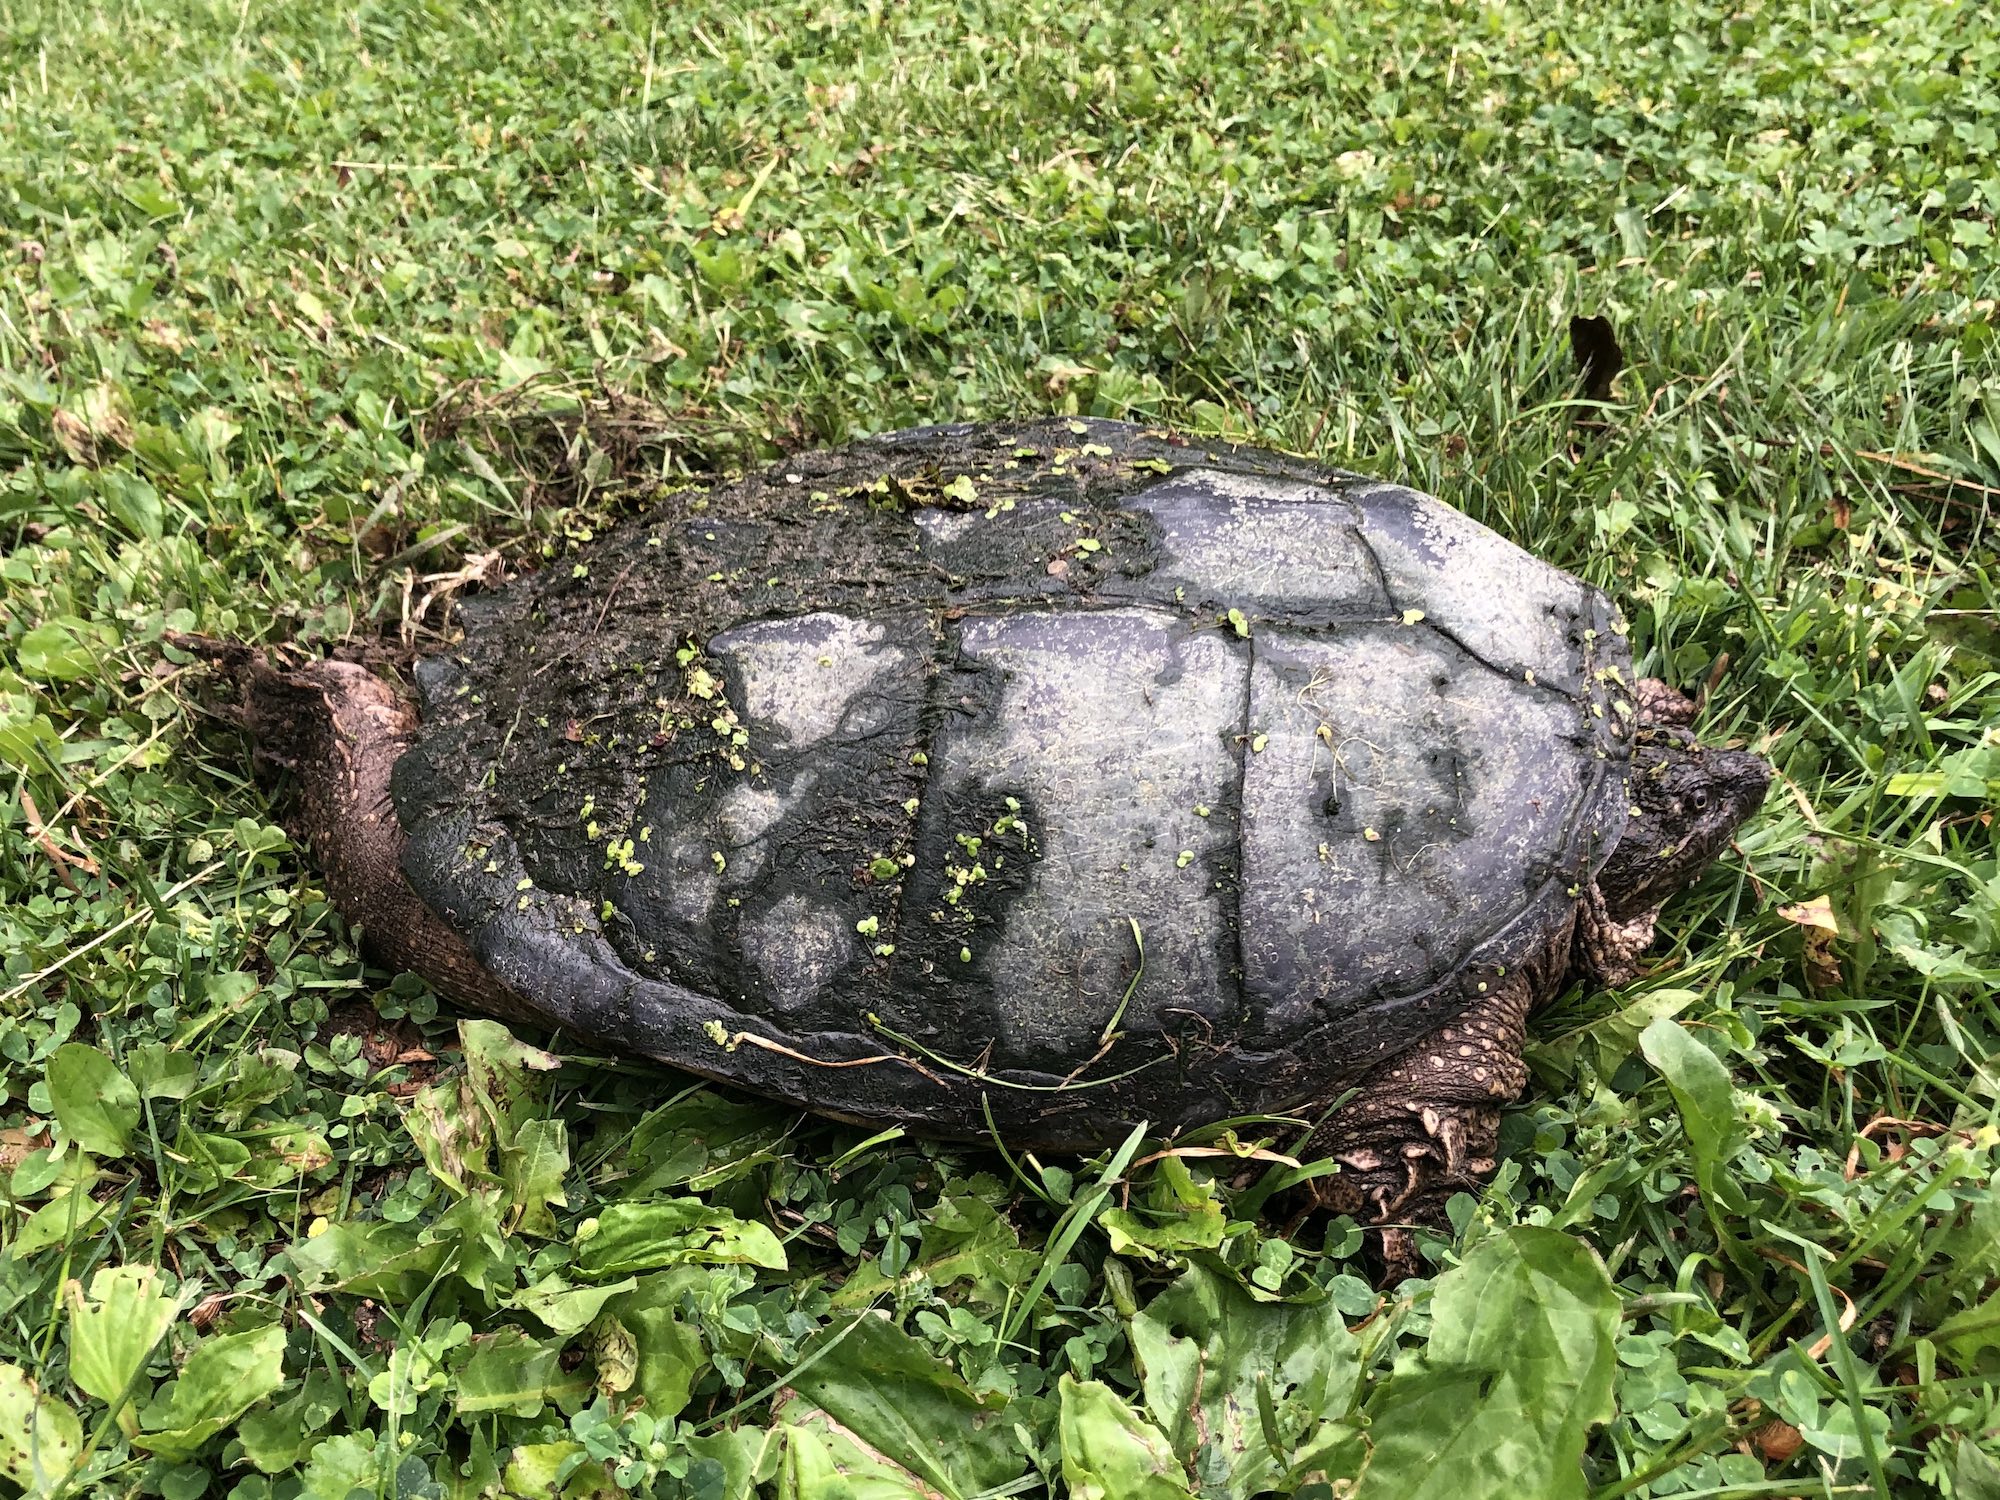 Snapping Turtle along Arbor Drive by Ho-Nee-Um Pond in Madison, Wisconsin on June 4, 2021.